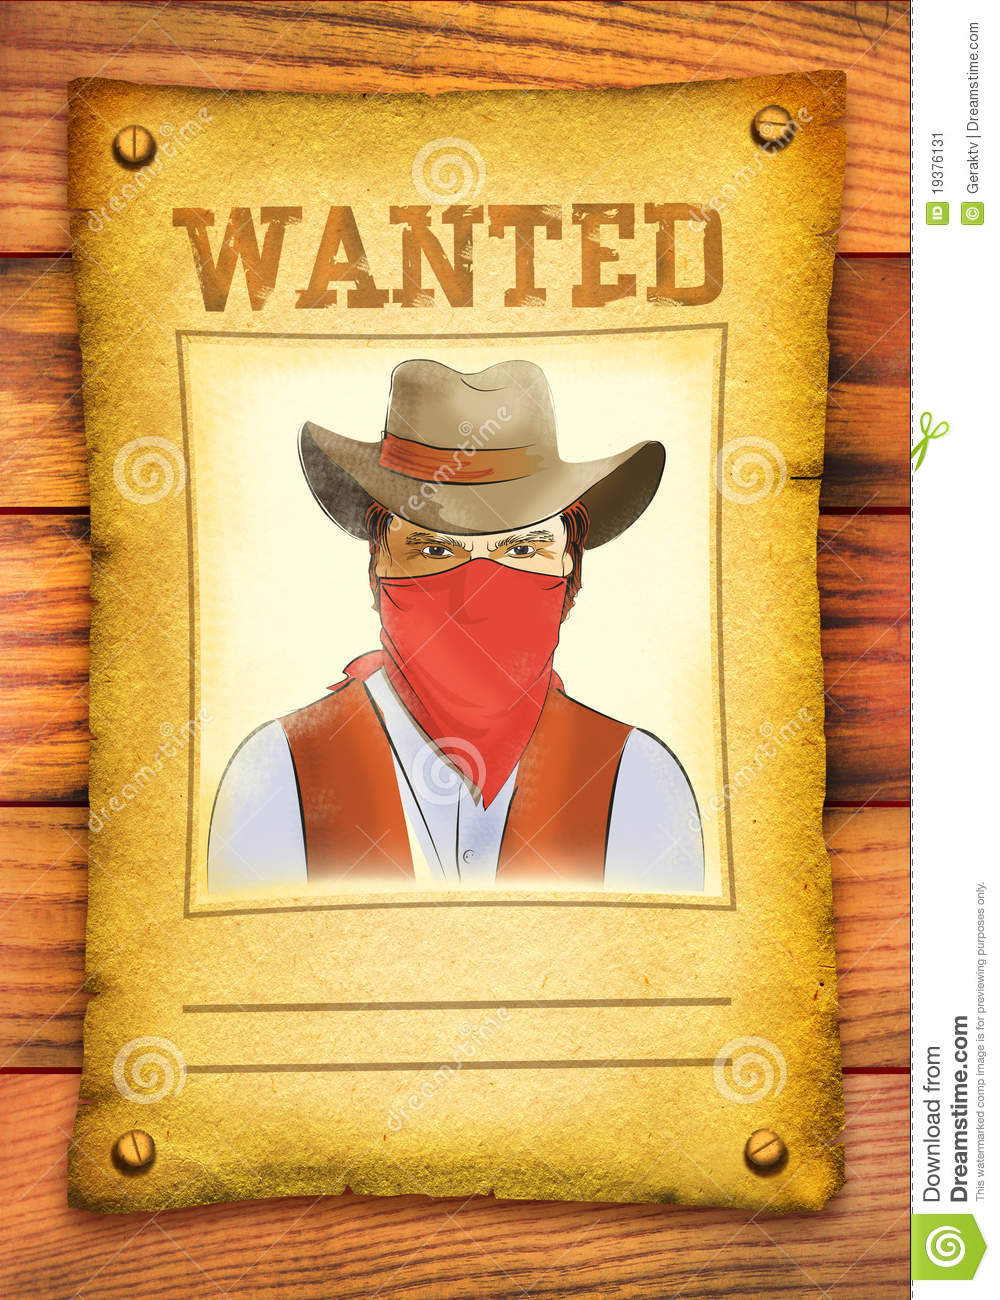 Wanted poster with bandit face .